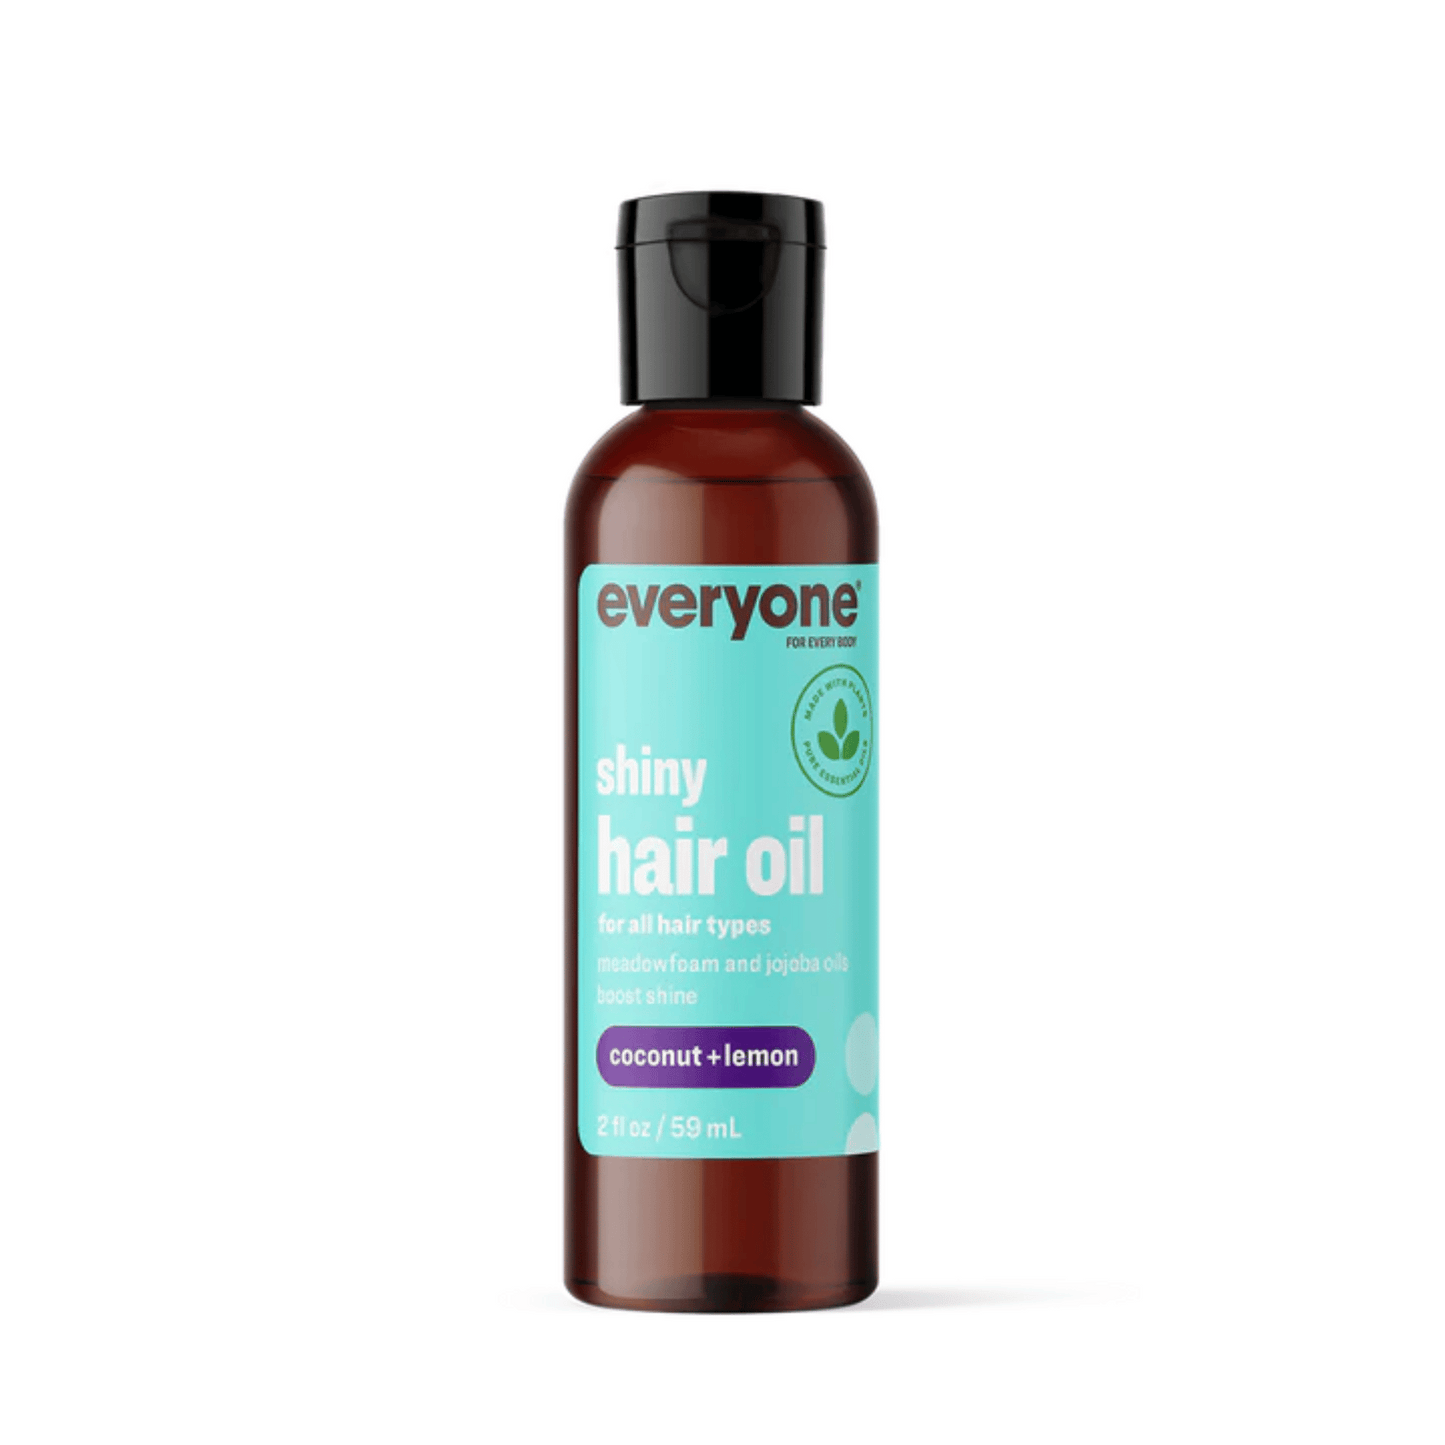 Primary Image of Shiny Hair Oil 